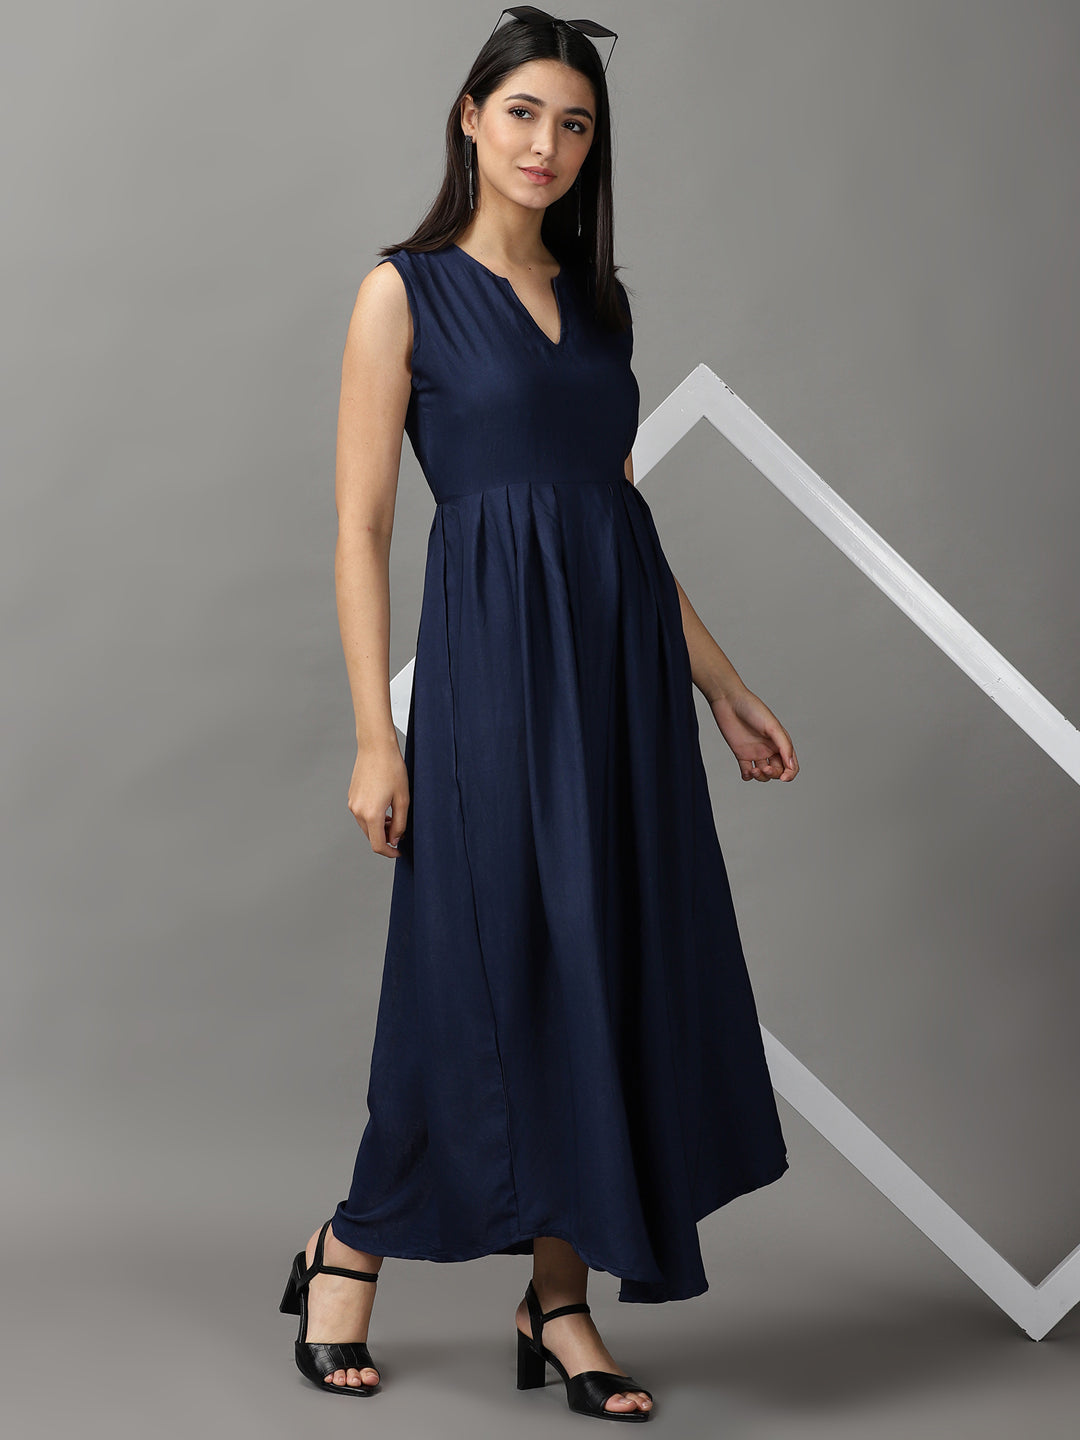 Women's Navy Blue Solid Fit and Flare Dress